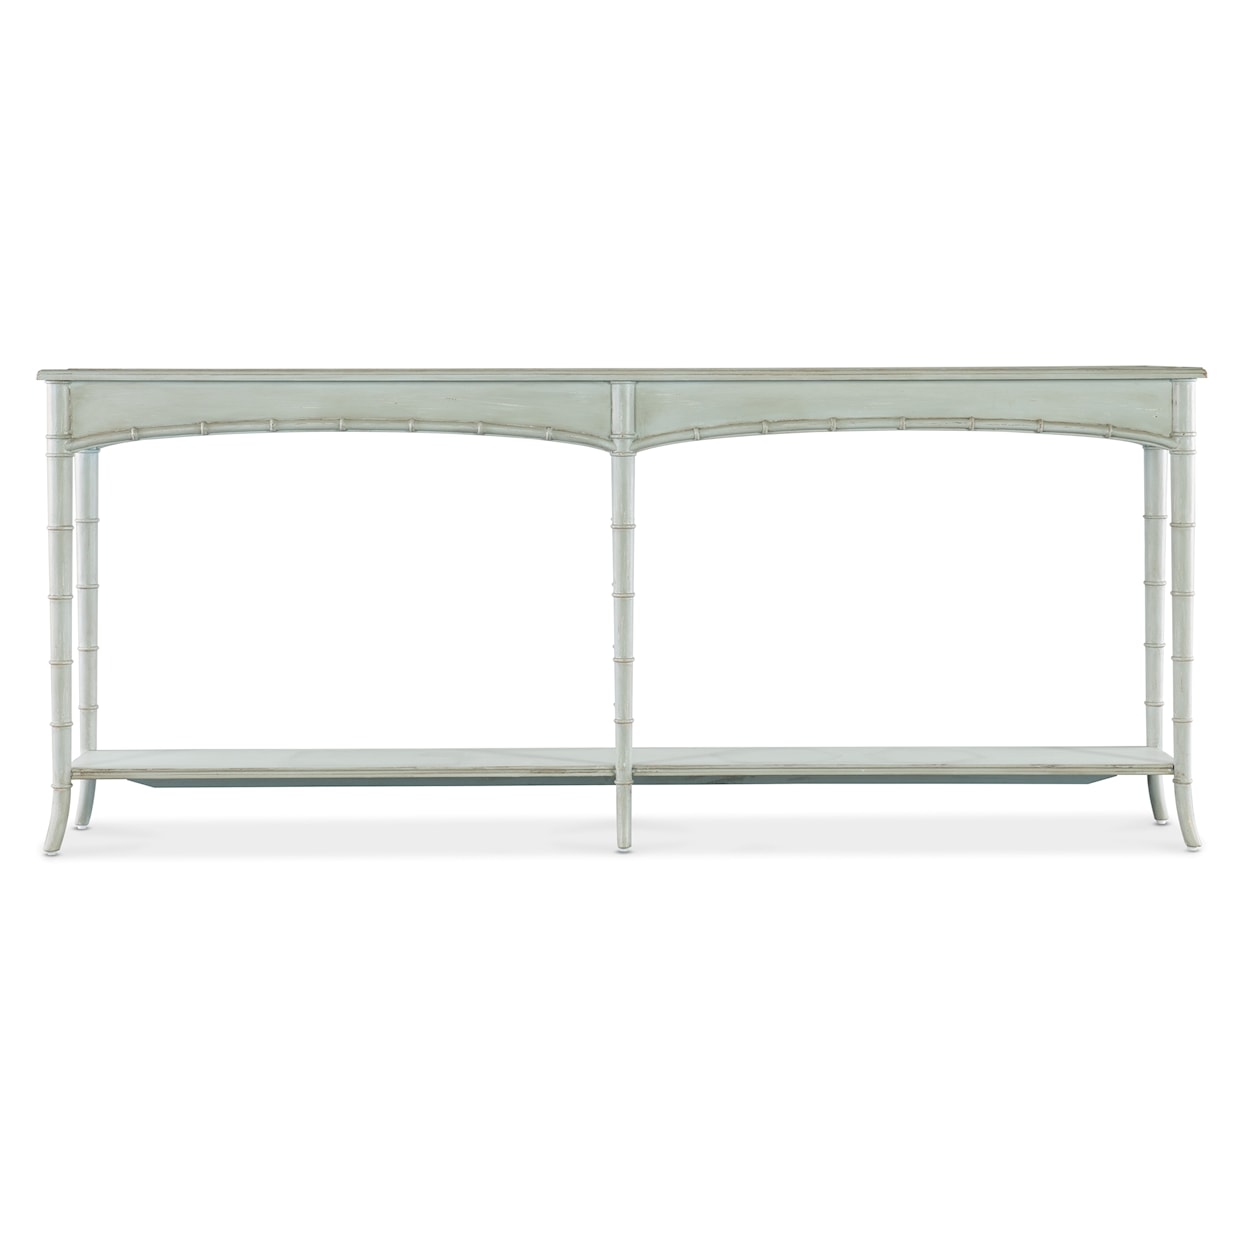 Hooker Furniture Charleston Console Table with Fixed Display Shelves